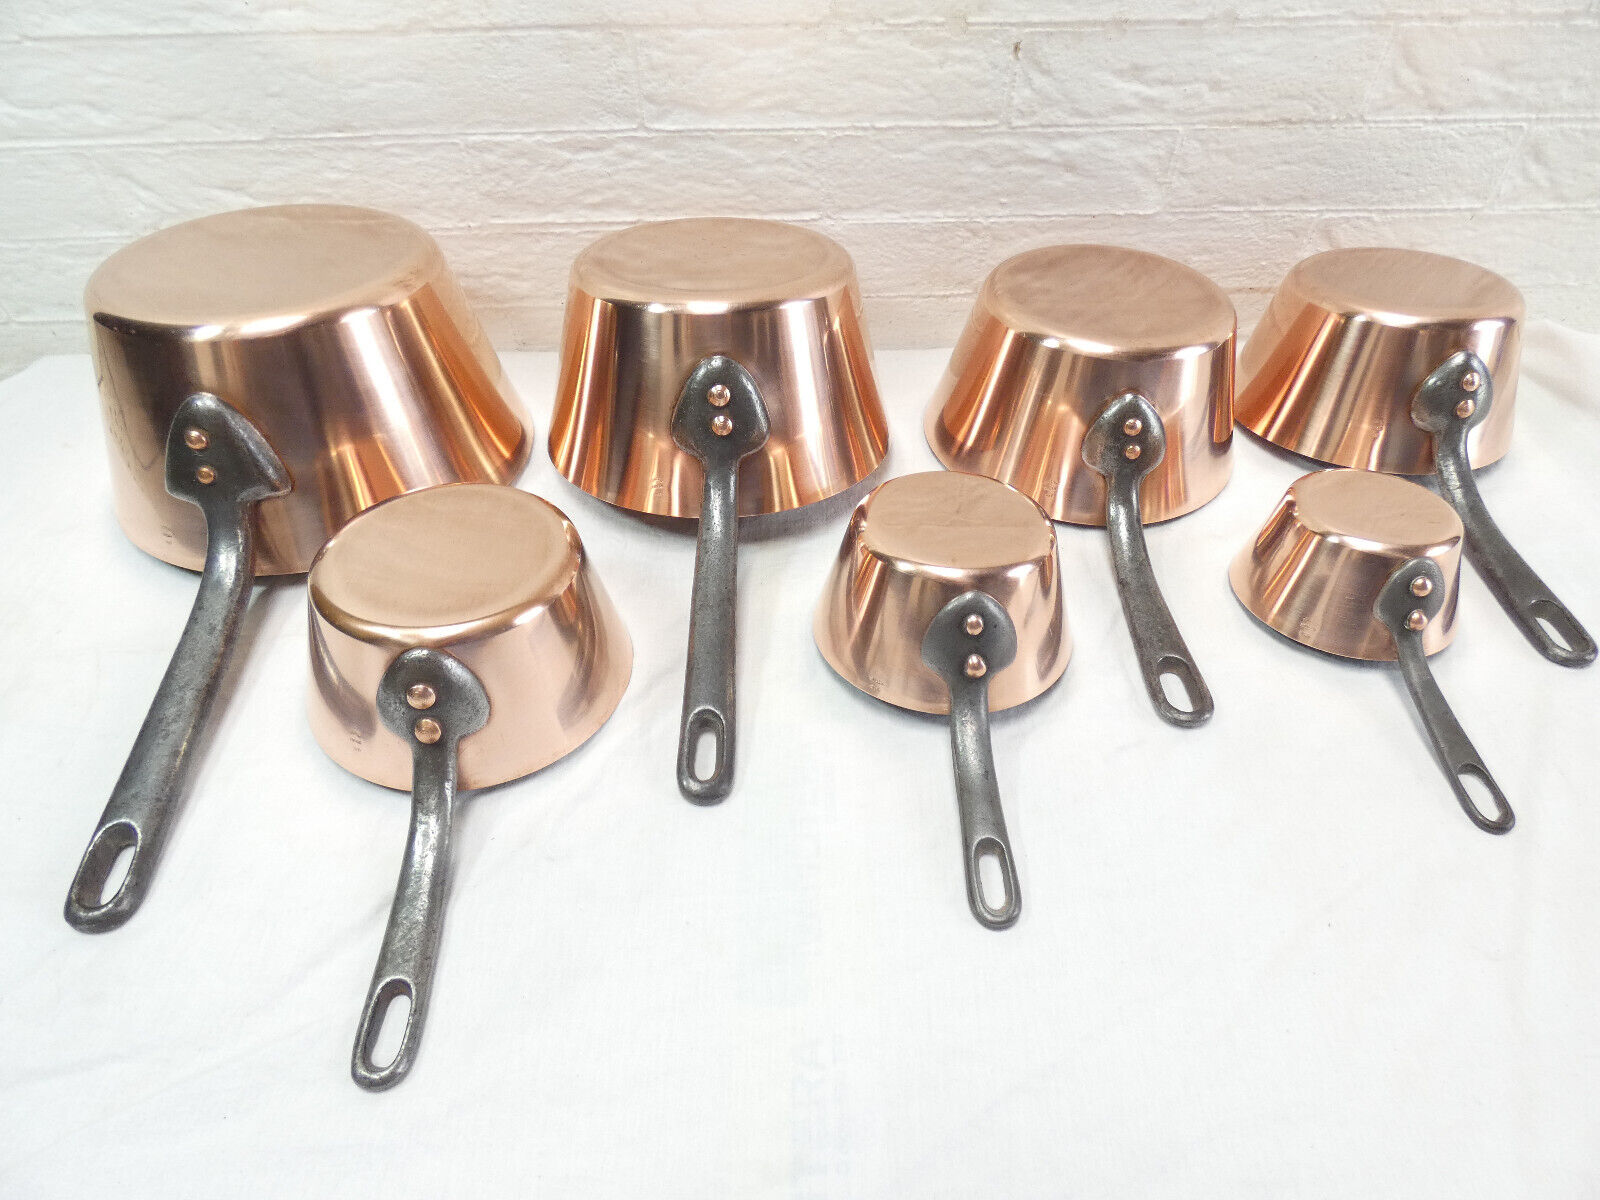 7 Massive French flared copper pans – Great quality - Special serie villedieu